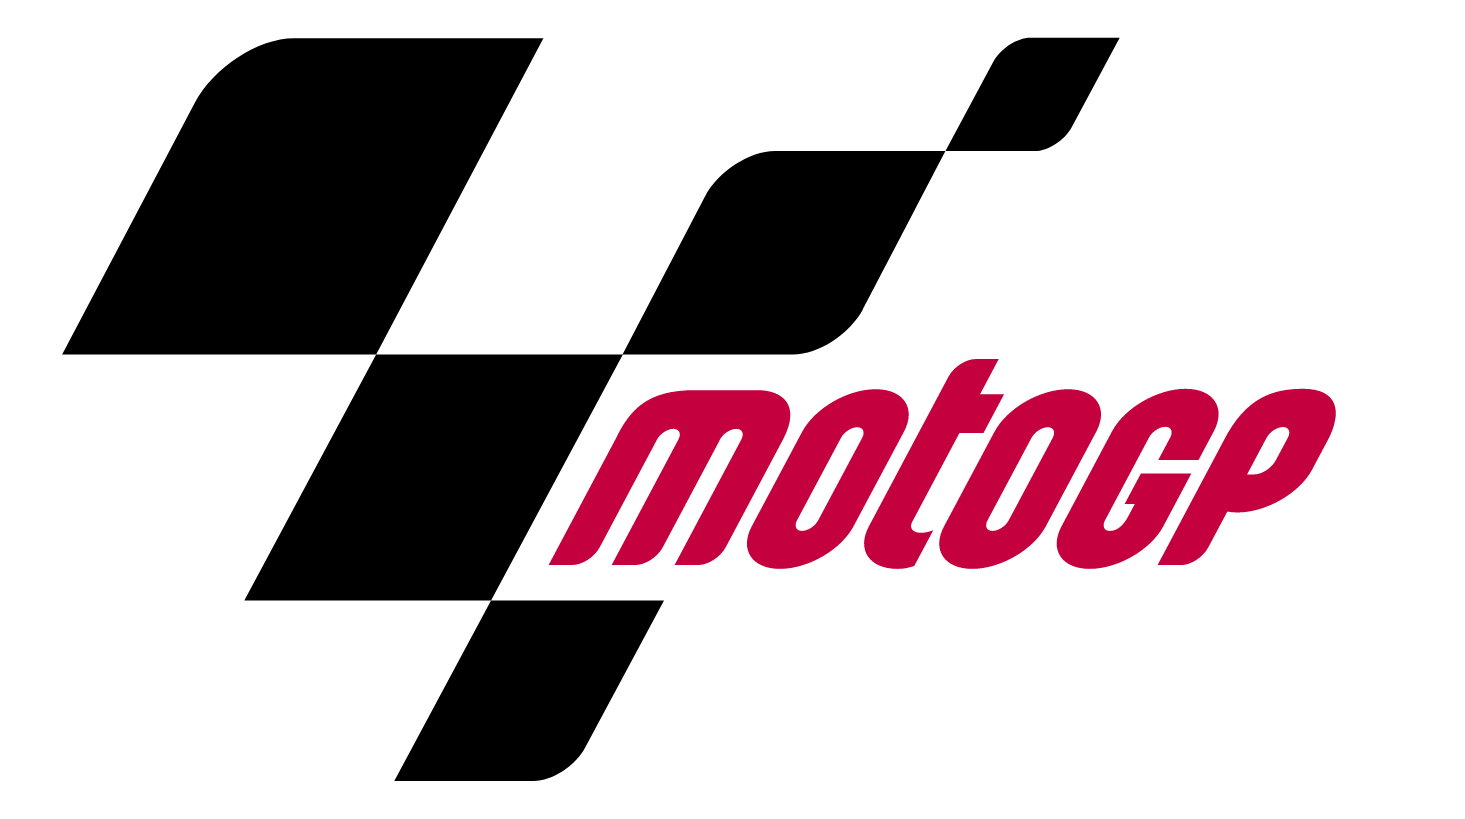 motogp race betting tips and championship odds